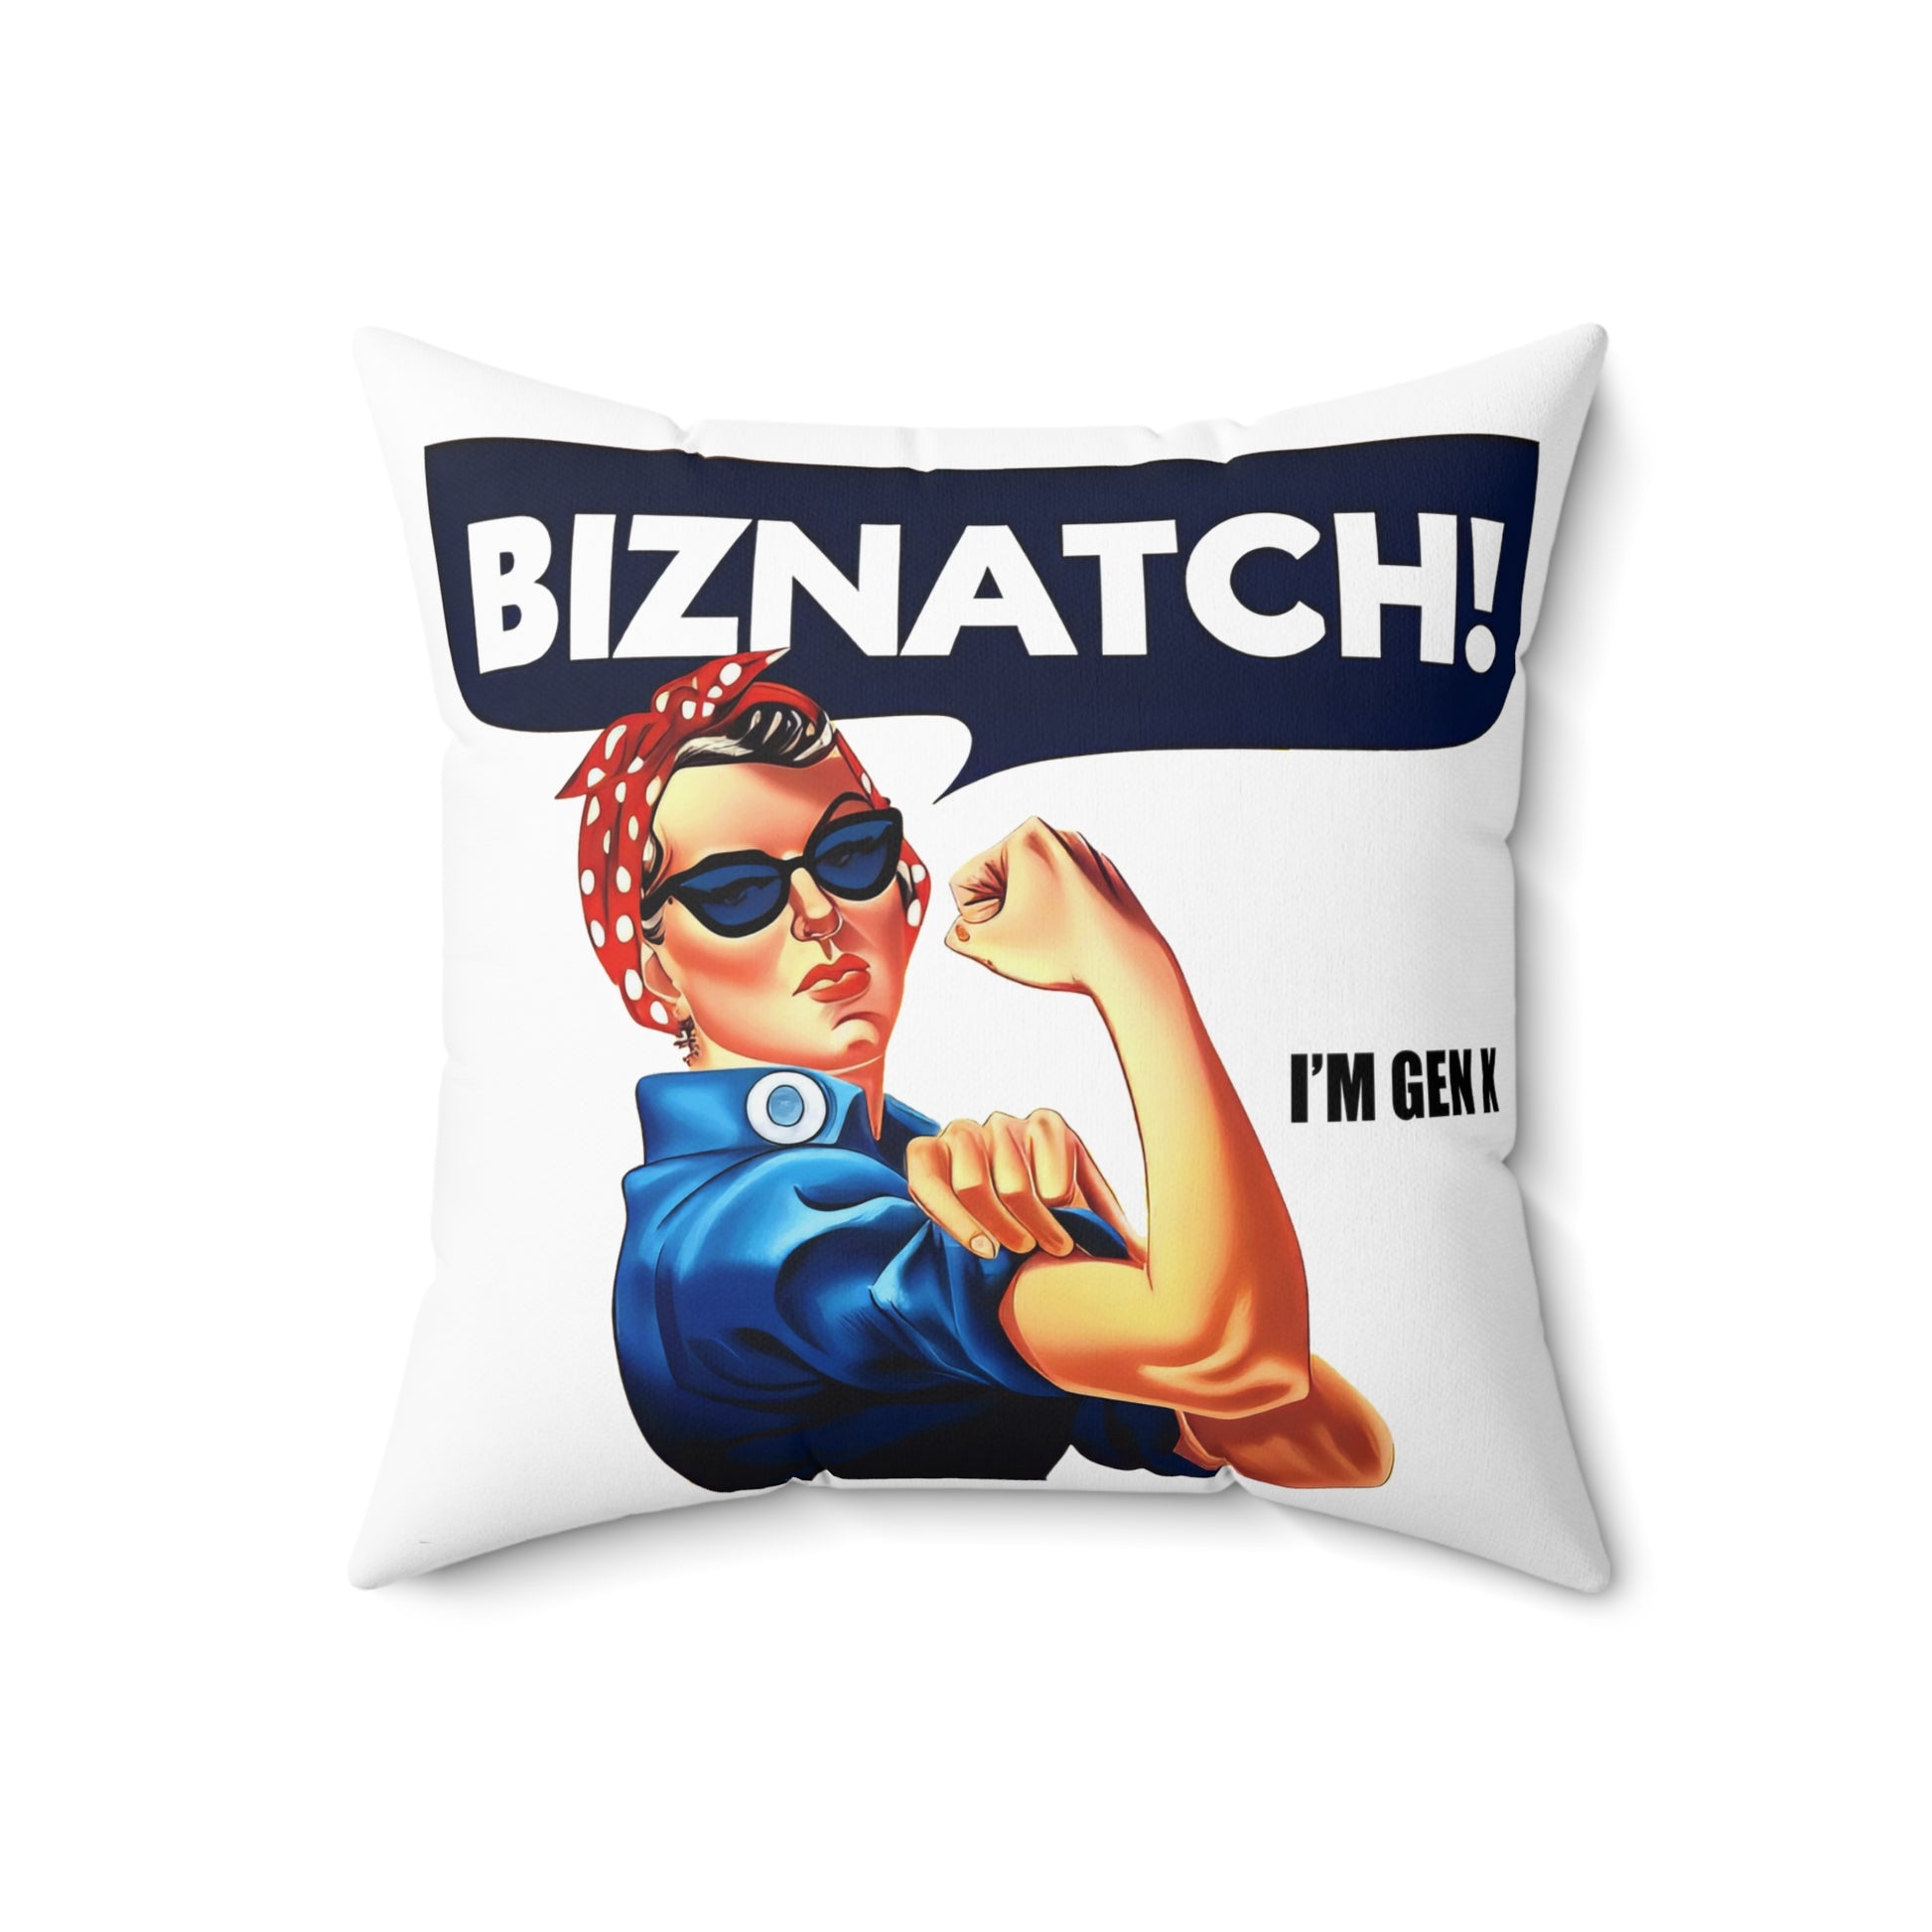 Show off your Gen X pride with this bold and empowering pillow featuring Rosie the Riveter and the phrase "Biznatch! I’m Gen X". Availble in 3 sizes.